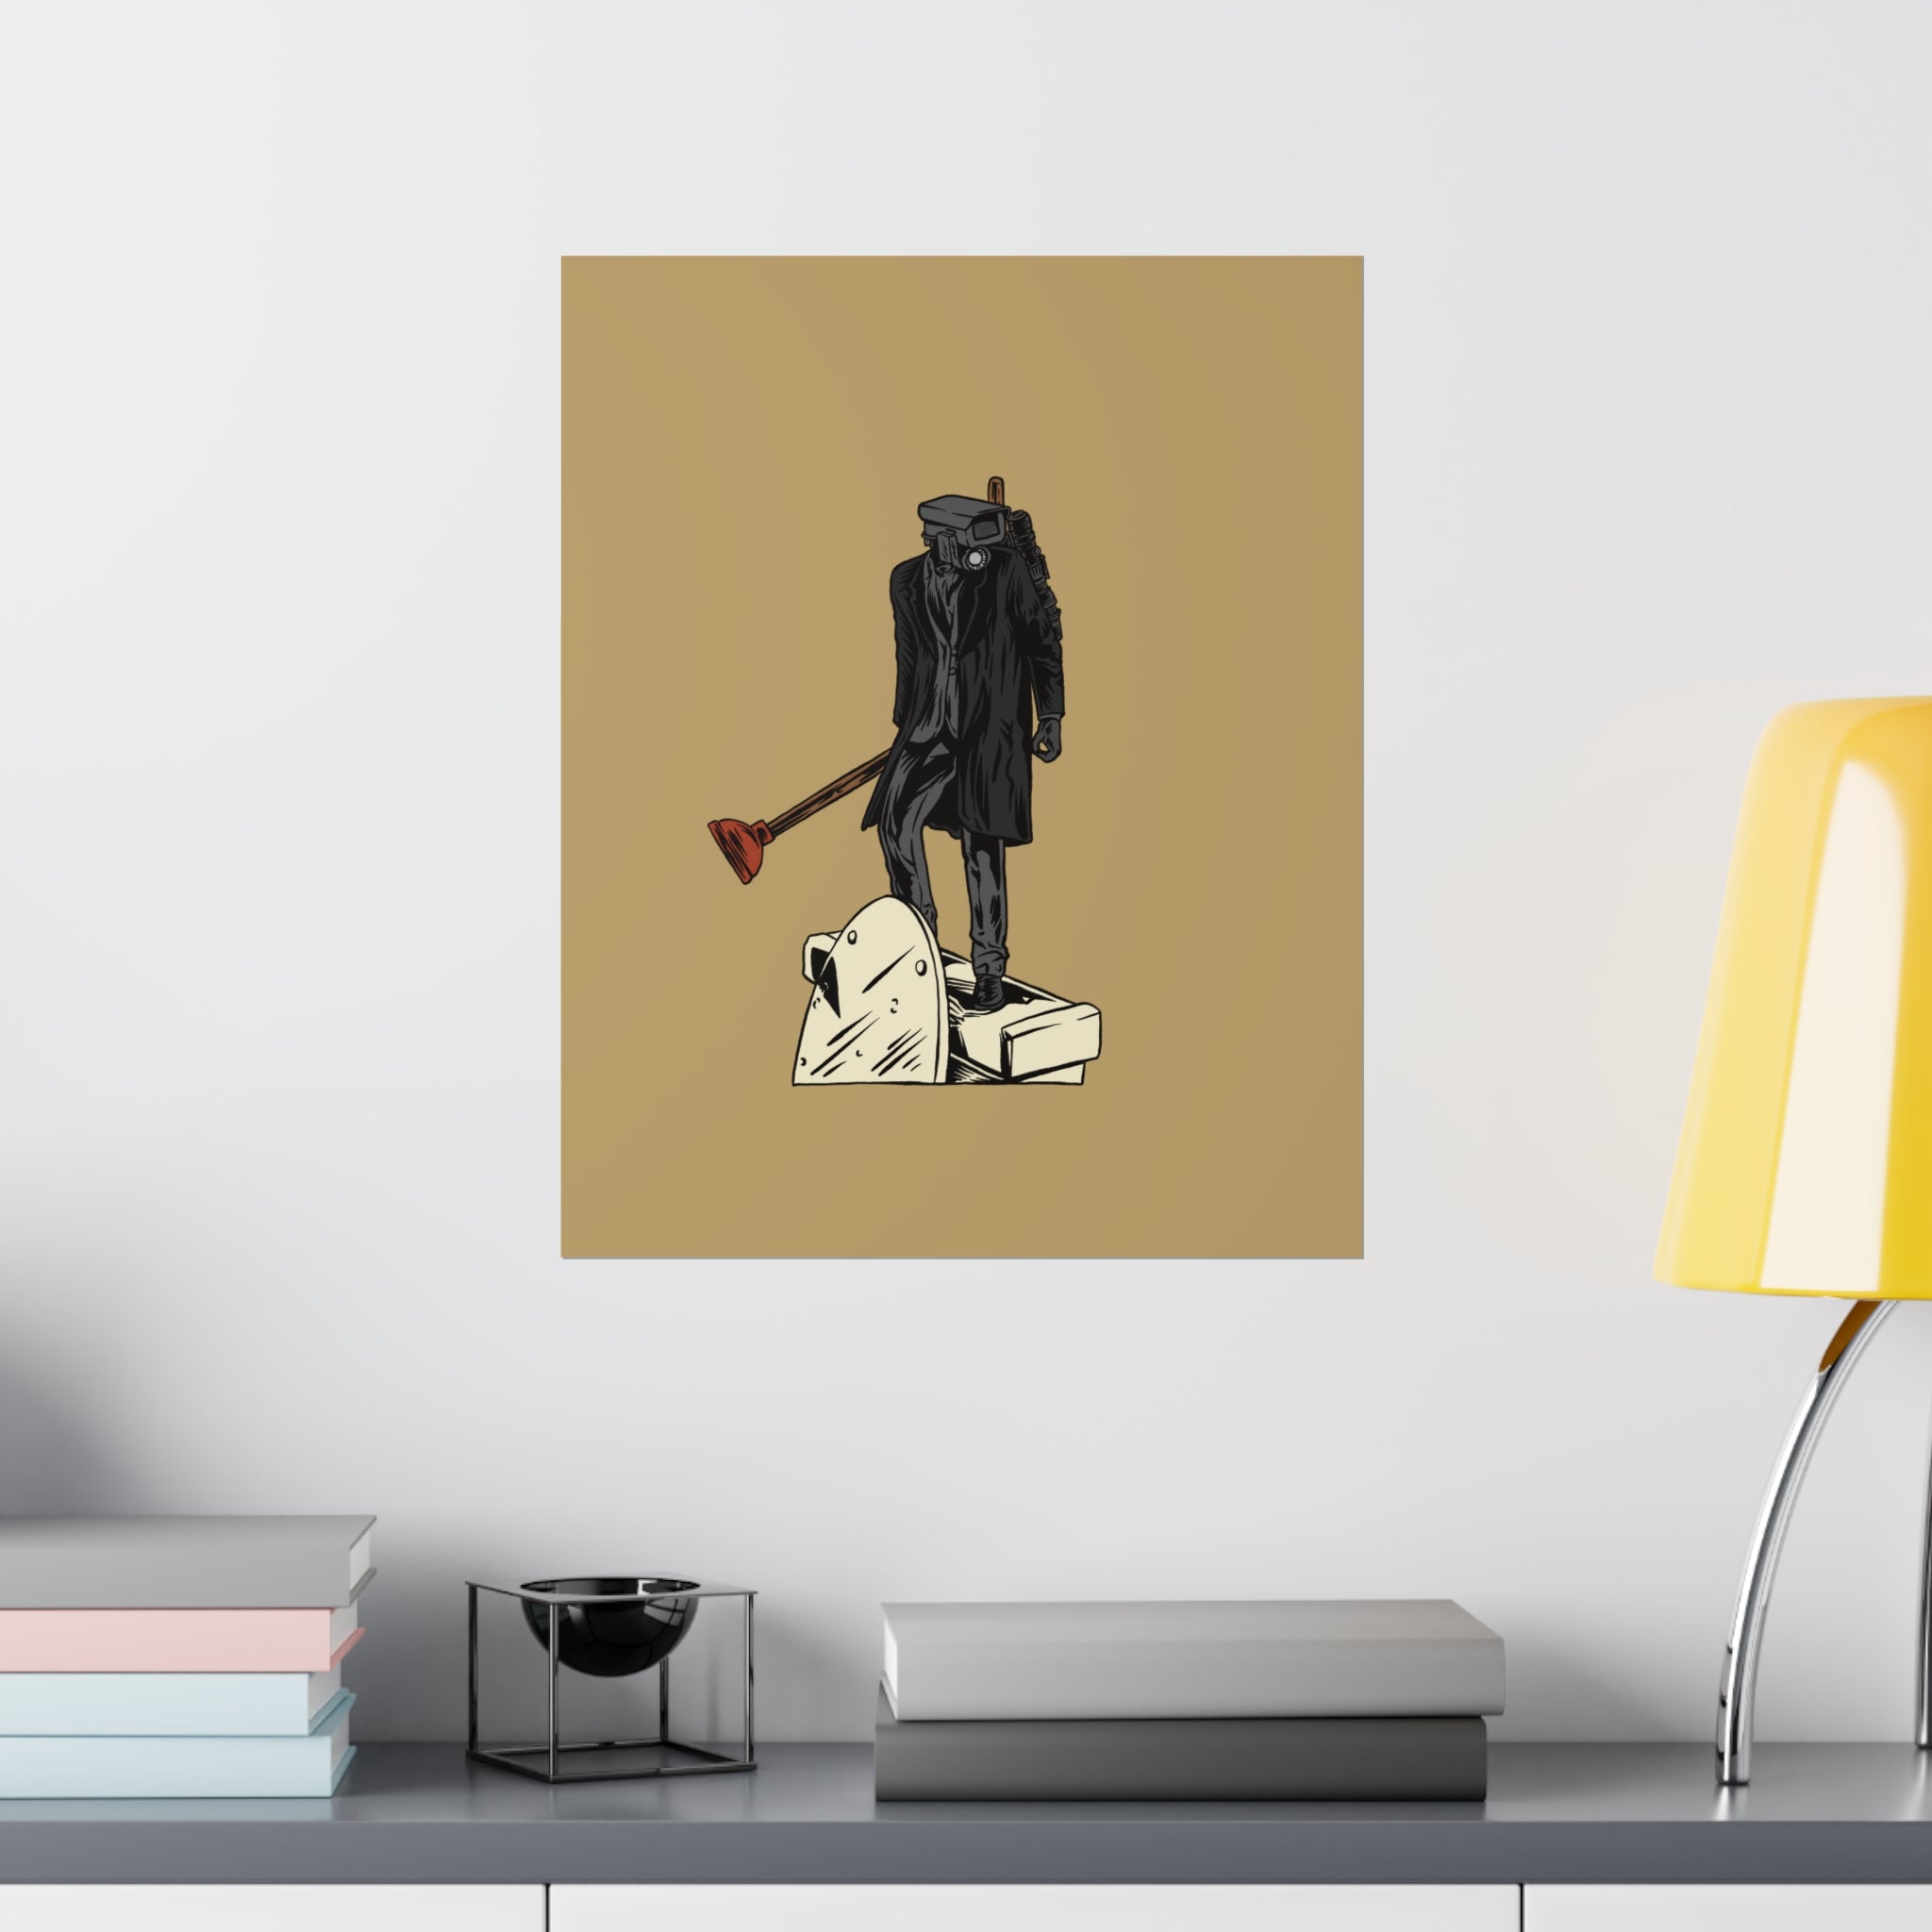 Plungerman on tan matte poster hung over credenza with lamp and books